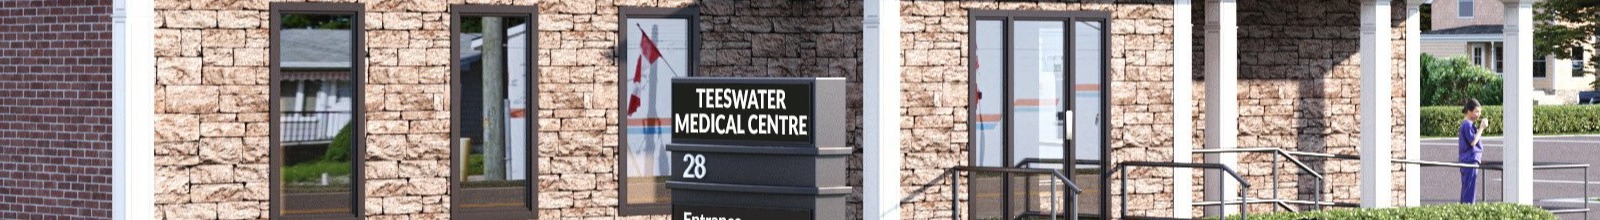 Proposed rendering of the Teeswater Medical Centre